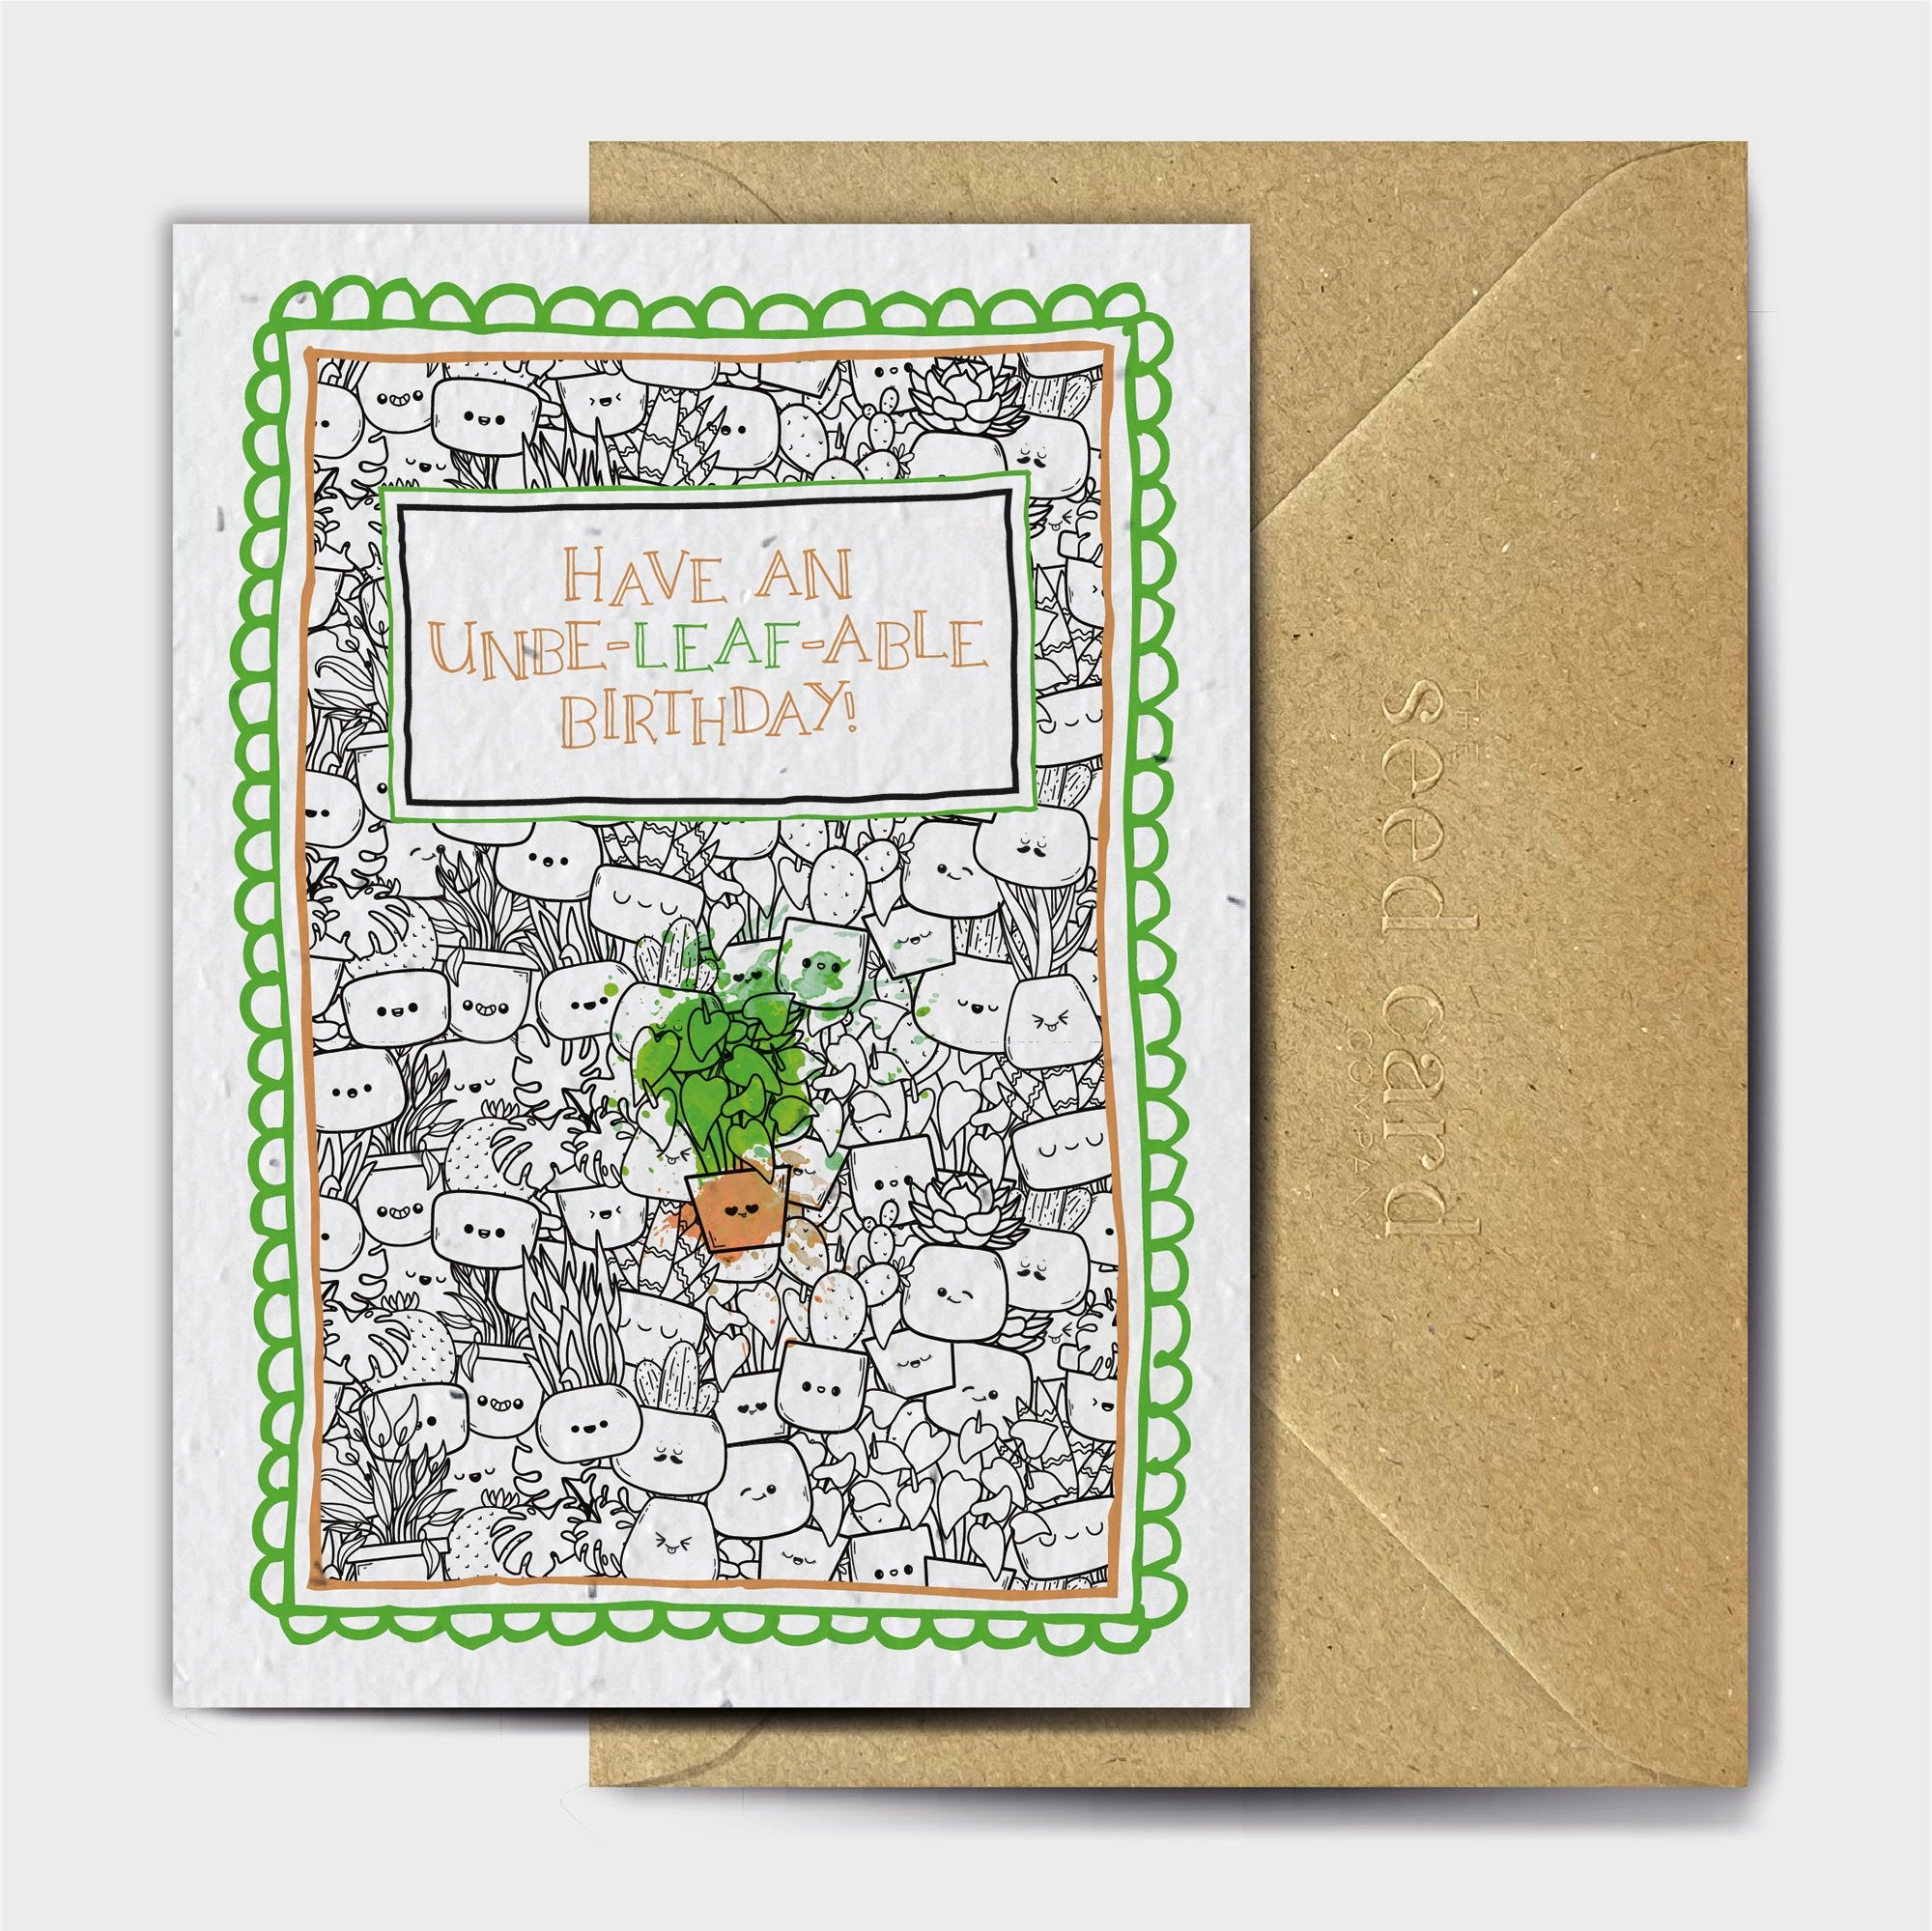 Shop online Unbe-leaf-able Birthday - 100% biodegradable seed-embedded cards Shop -The Seed Card Company